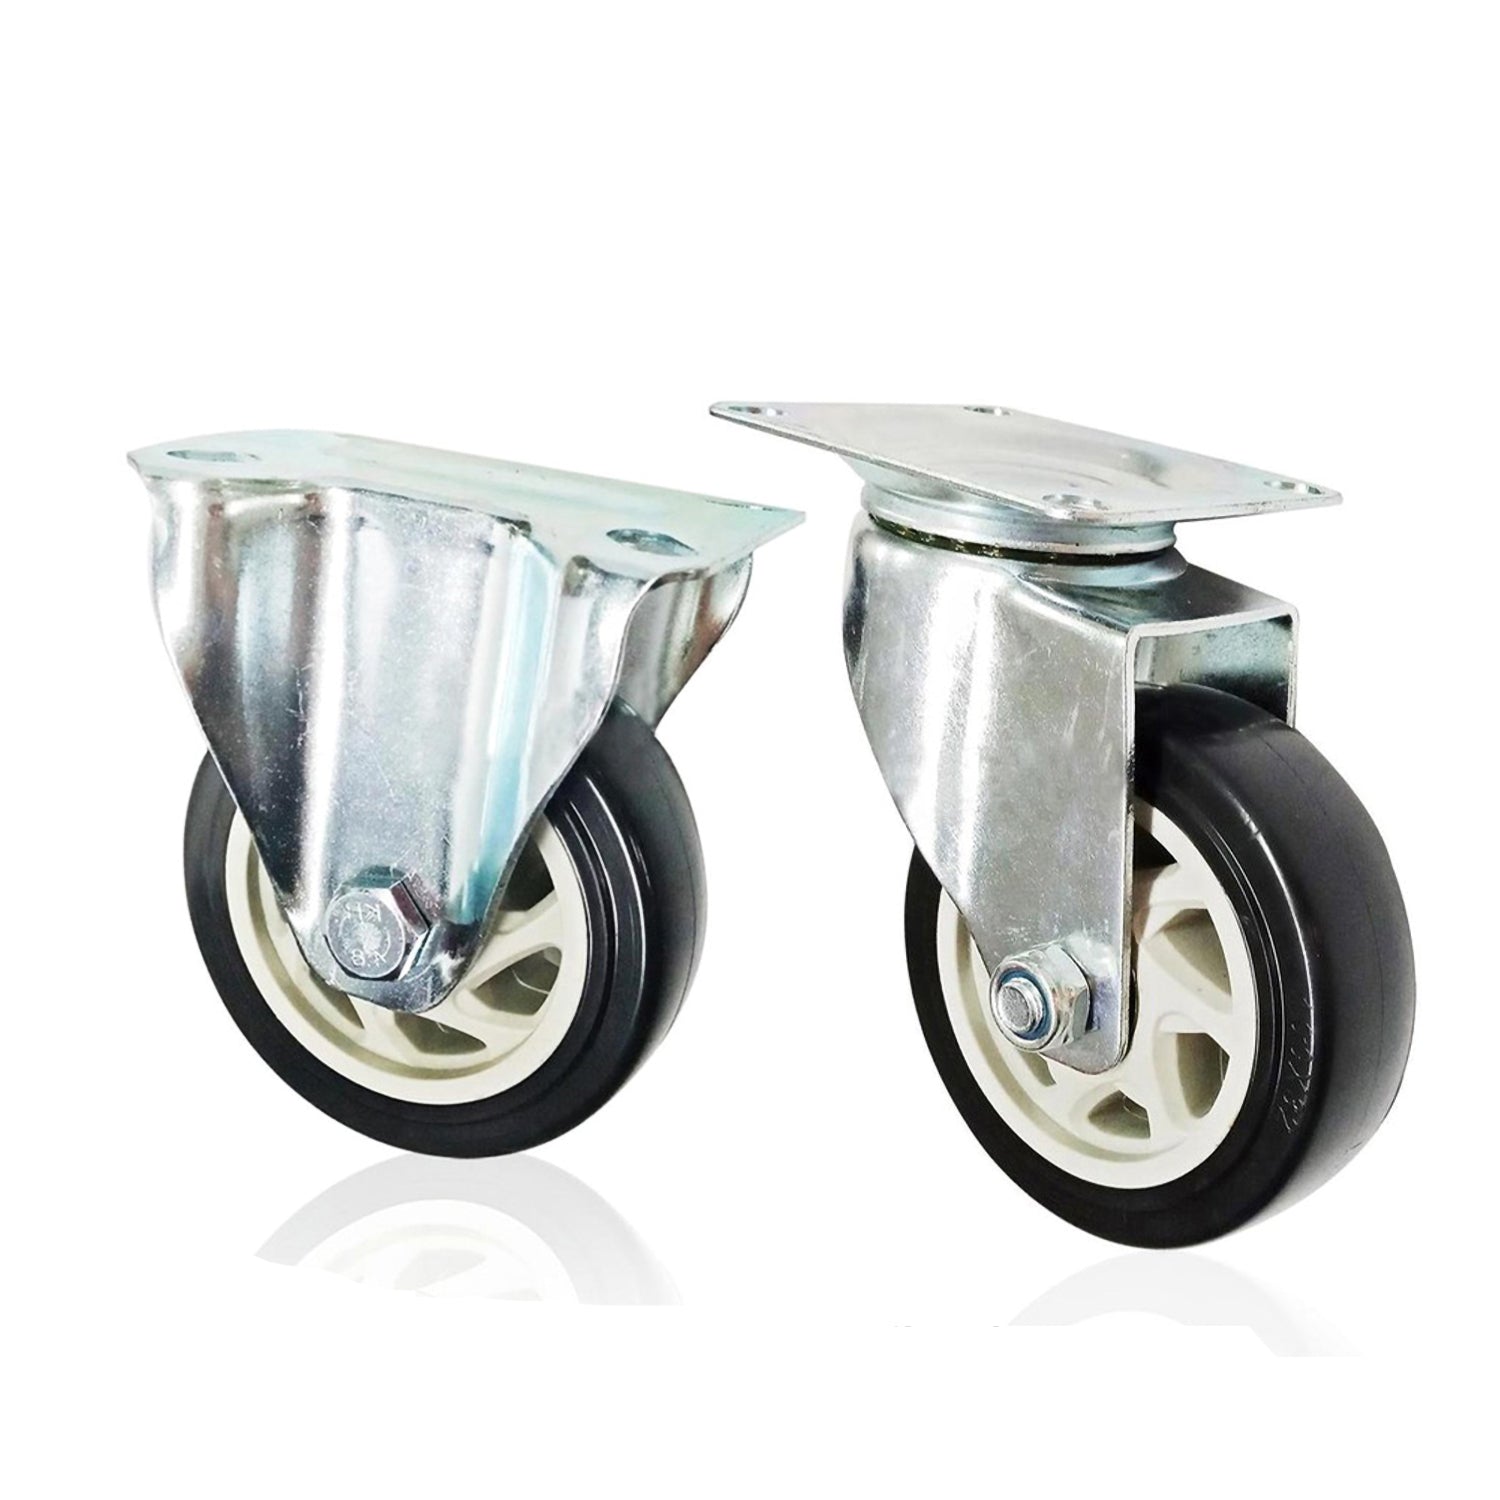 PU Caster Wheels Front and Rear Wheels